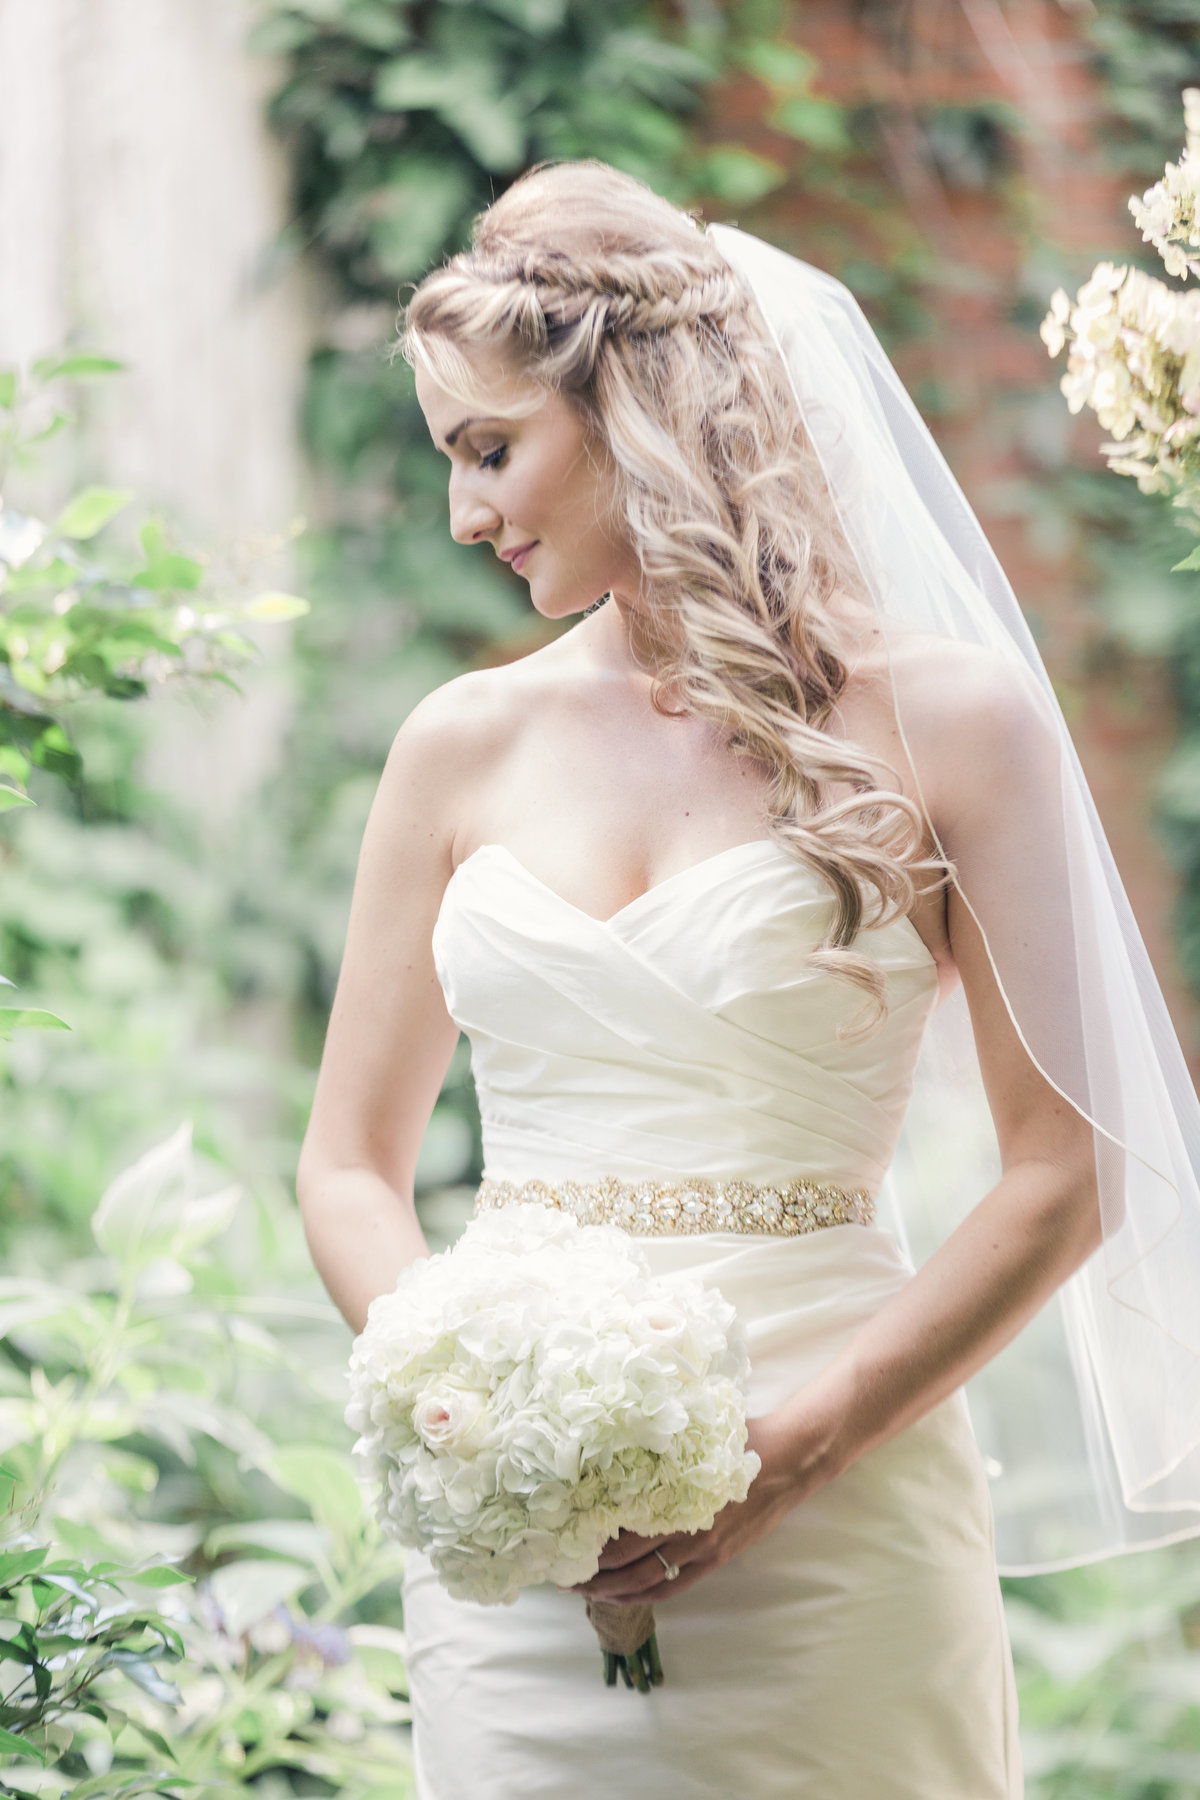 Bridal session with Charlotte wedding photographer Jamie Lucido at the Morehead Inn, with beautiful bride and bouquet